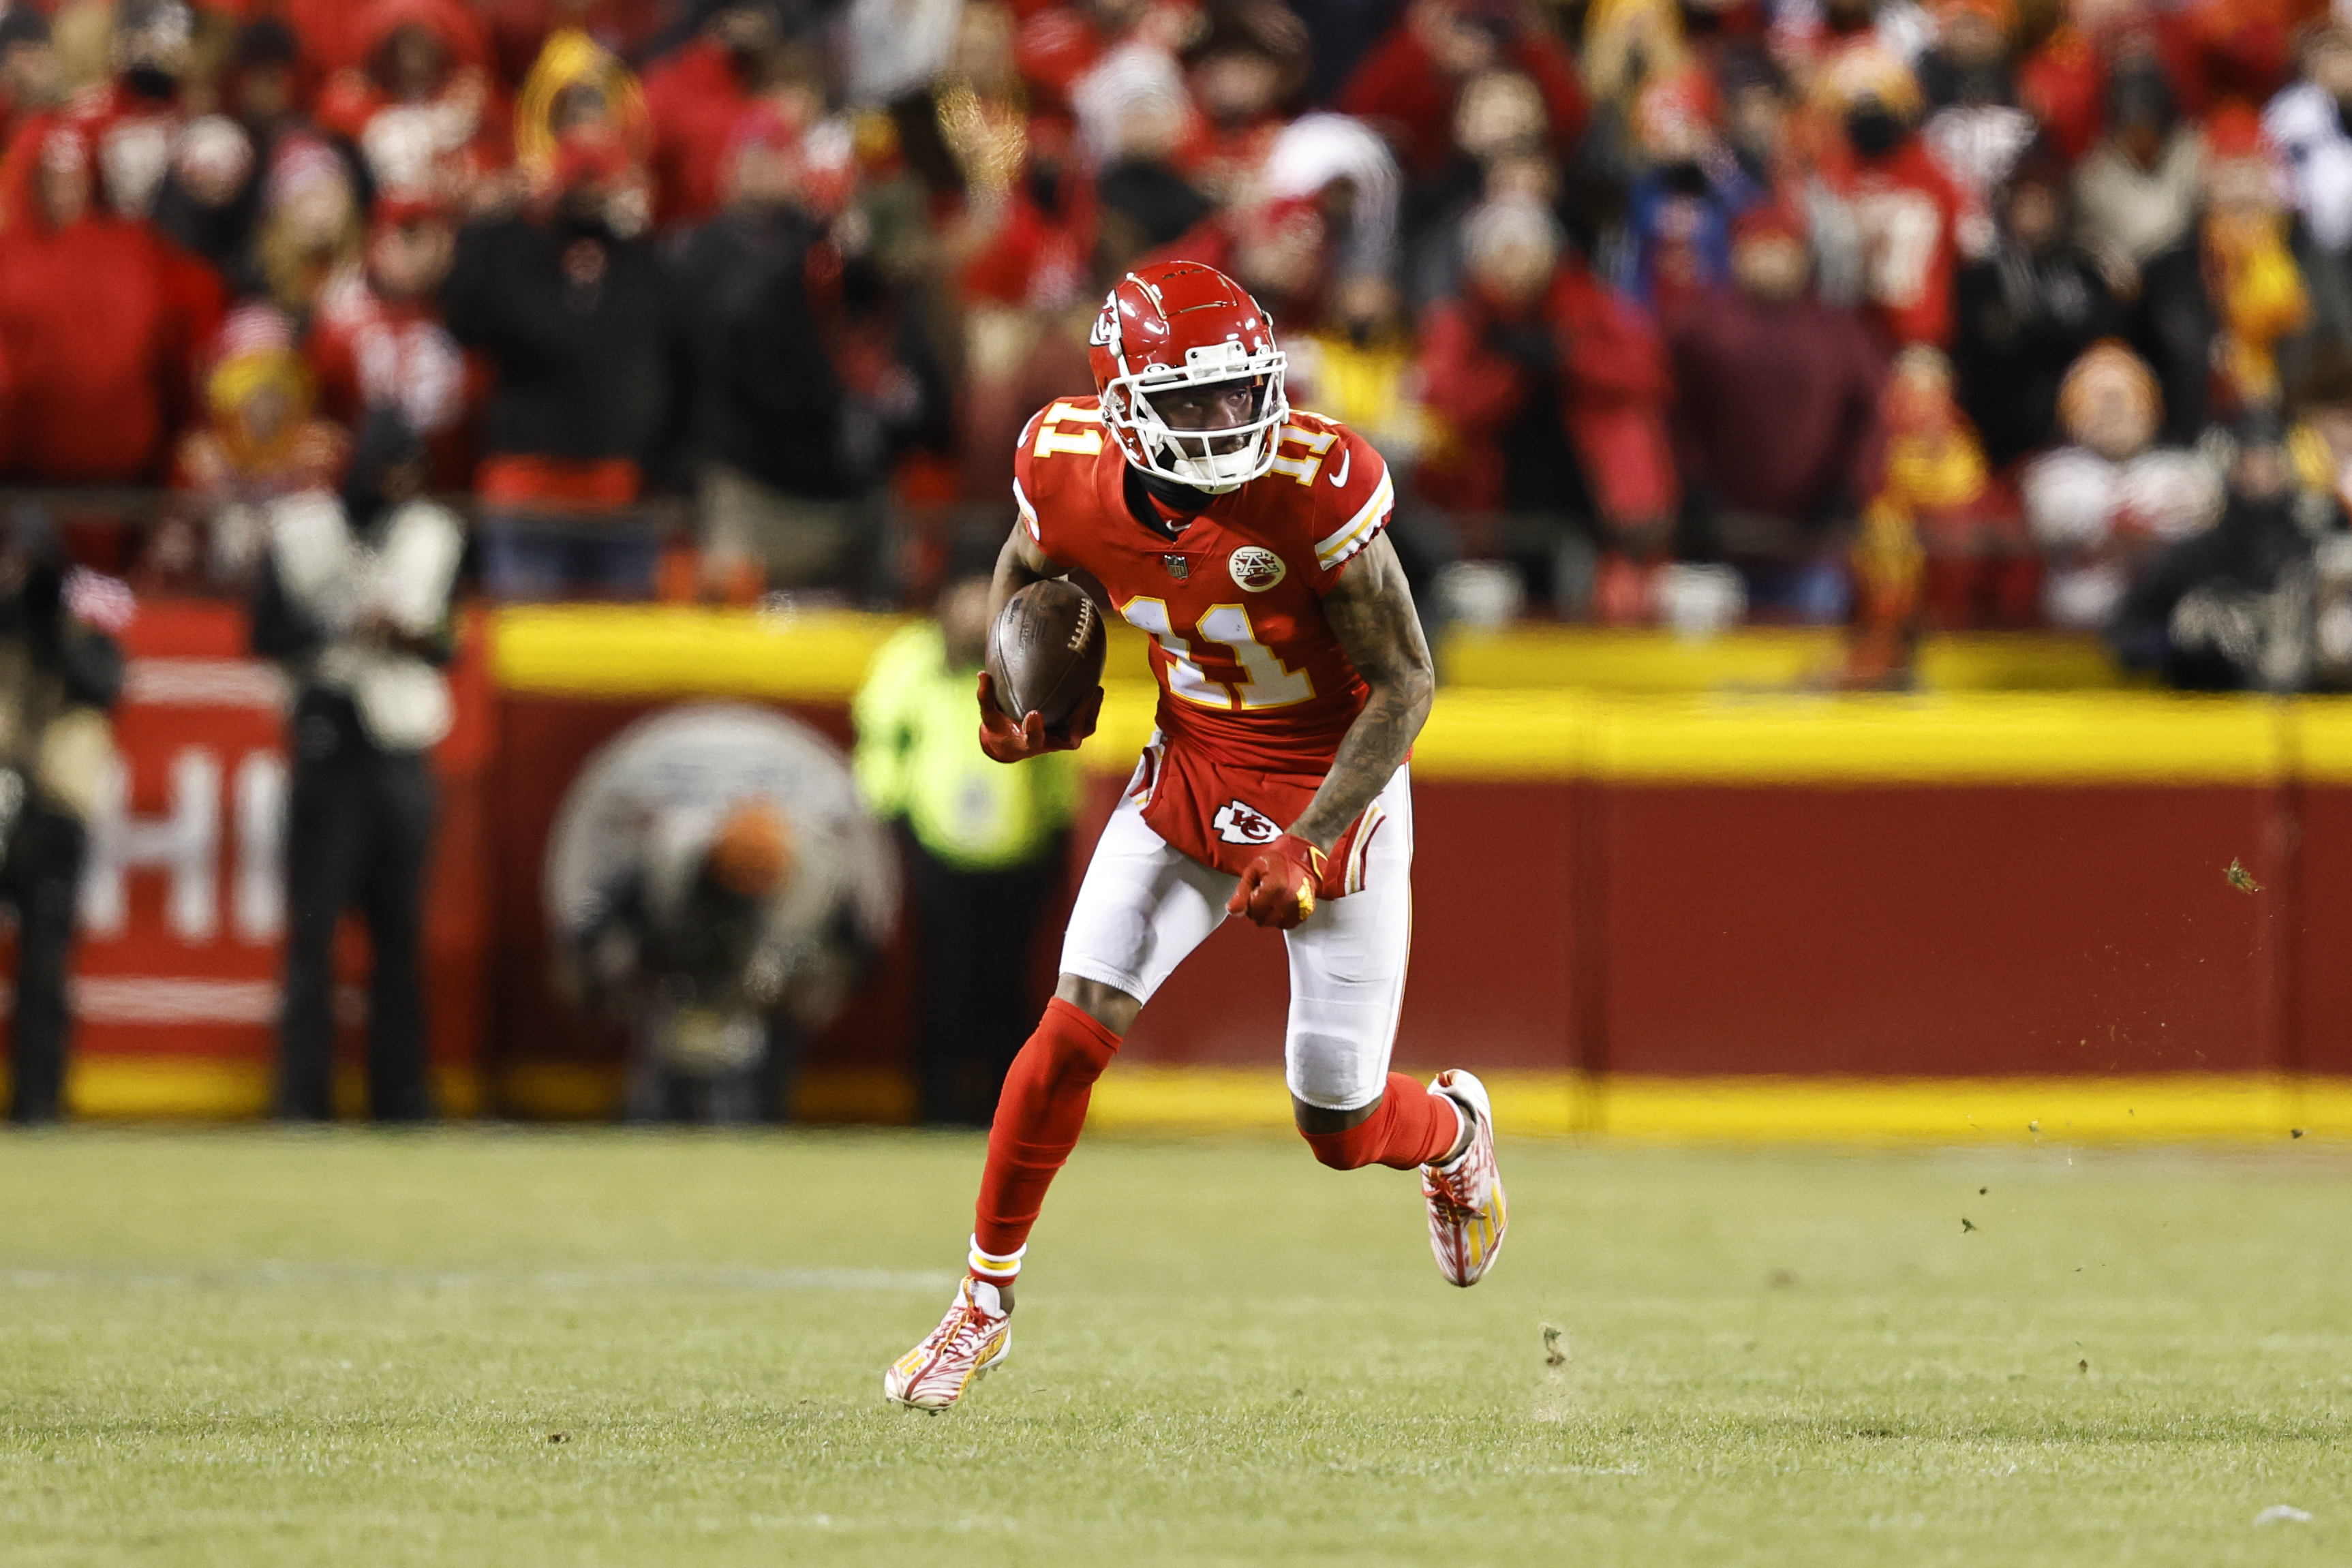 Marquez Valdes-Scantling #11 of the Kansas City Chiefs runs with the ball during the AFC Championship NFL football game between the Kansas City Chiefs and the Cincinnati Bengals at GEHA Field at Arrowhead Stadium on January 29, 2023 in Kansas City, Missouri.